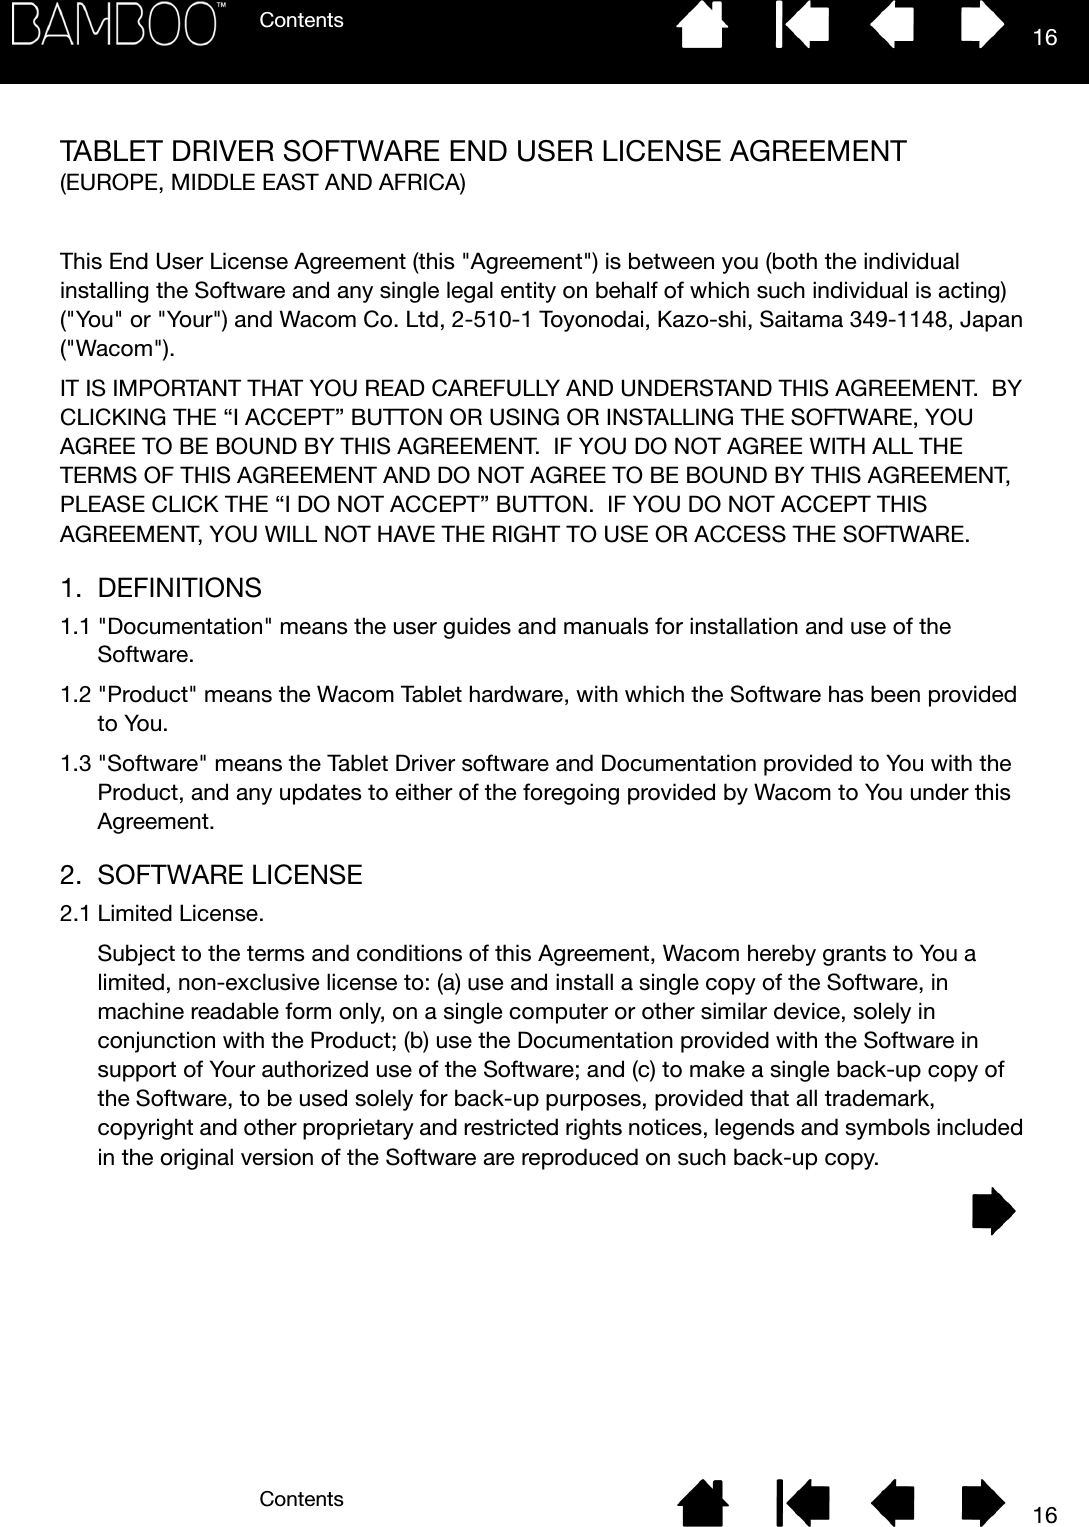 ContentsContents 1616TABLET DRIVER SOFTWARE END USER LICENSE AGREEMENT(EUROPE, MIDDLE EAST AND AFRICA) This End User License Agreement (this &quot;Agreement&quot;) is between you (both the individual installing the Software and any single legal entity on behalf of which such individual is acting) (&quot;You&quot; or &quot;Your&quot;) and Wacom Co. Ltd, 2-510-1 Toyonodai, Kazo-shi, Saitama 349-1148, Japan (&quot;Wacom&quot;). IT IS IMPORTANT THAT YOU READ CAREFULLY AND UNDERSTAND THIS AGREEMENT.  BY CLICKING THE “I ACCEPT” BUTTON OR USING OR INSTALLING THE SOFTWARE, YOU AGREE TO BE BOUND BY THIS AGREEMENT.  IF YOU DO NOT AGREE WITH ALL THE TERMS OF THIS AGREEMENT AND DO NOT AGREE TO BE BOUND BY THIS AGREEMENT, PLEASE CLICK THE “I DO NOT ACCEPT” BUTTON.  IF YOU DO NOT ACCEPT THIS AGREEMENT, YOU WILL NOT HAVE THE RIGHT TO USE OR ACCESS THE SOFTWARE.1. DEFINITIONS1.1 &quot;Documentation&quot; means the user guides and manuals for installation and use of the Software. 1.2 &quot;Product&quot; means the Wacom Tablet hardware, with which the Software has been provided to You. 1.3 &quot;Software&quot; means the Tablet Driver software and Documentation provided to You with the Product, and any updates to either of the foregoing provided by Wacom to You under this Agreement.2. SOFTWARE LICENSE2.1 Limited License.Subject to the terms and conditions of this Agreement, Wacom hereby grants to You a limited, non-exclusive license to: (a) use and install a single copy of the Software, in machine readable form only, on a single computer or other similar device, solely in conjunction with the Product; (b) use the Documentation provided with the Software in support of Your authorized use of the Software; and (c) to make a single back-up copy of the Software, to be used solely for back-up purposes, provided that all trademark, copyright and other proprietary and restricted rights notices, legends and symbols included in the original version of the Software are reproduced on such back-up copy.